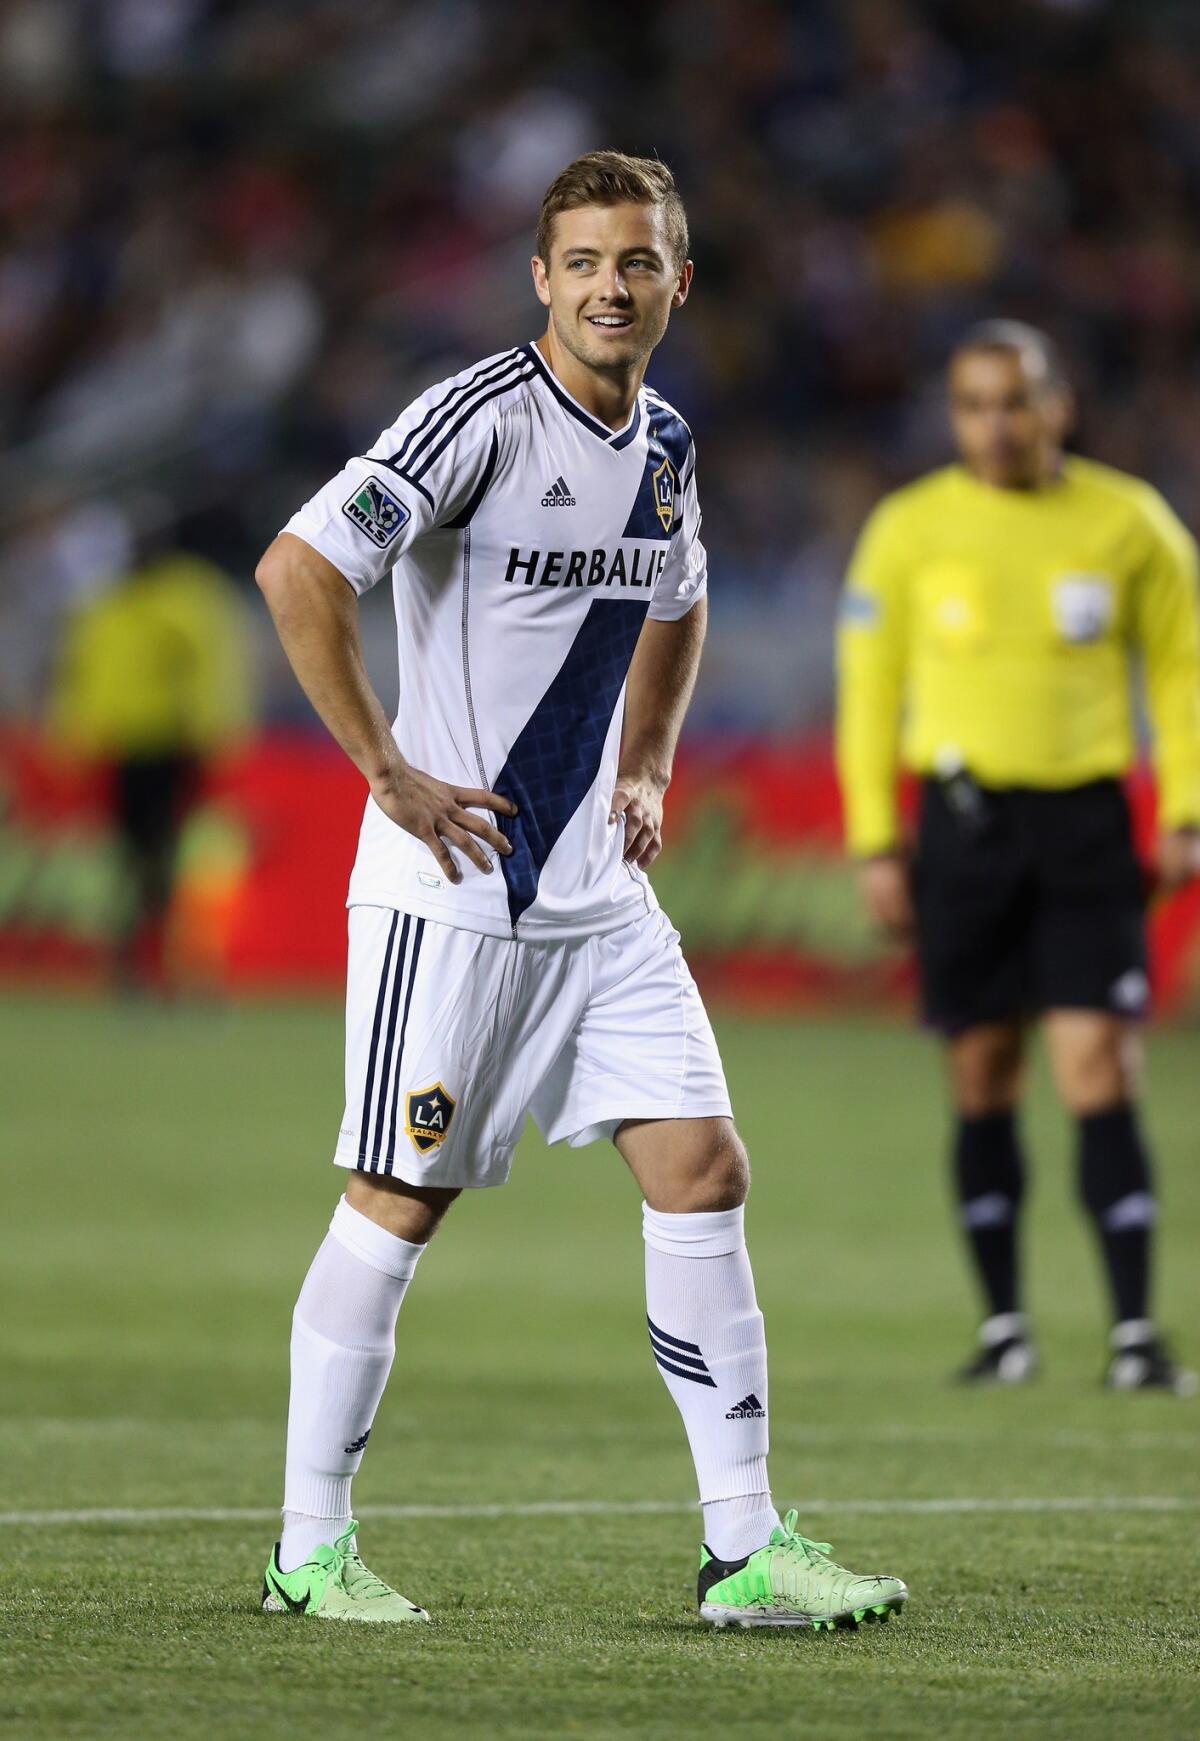 Midfielder Robbie Rogers hasn't made much of a difference for the Galaxy since joining the team.